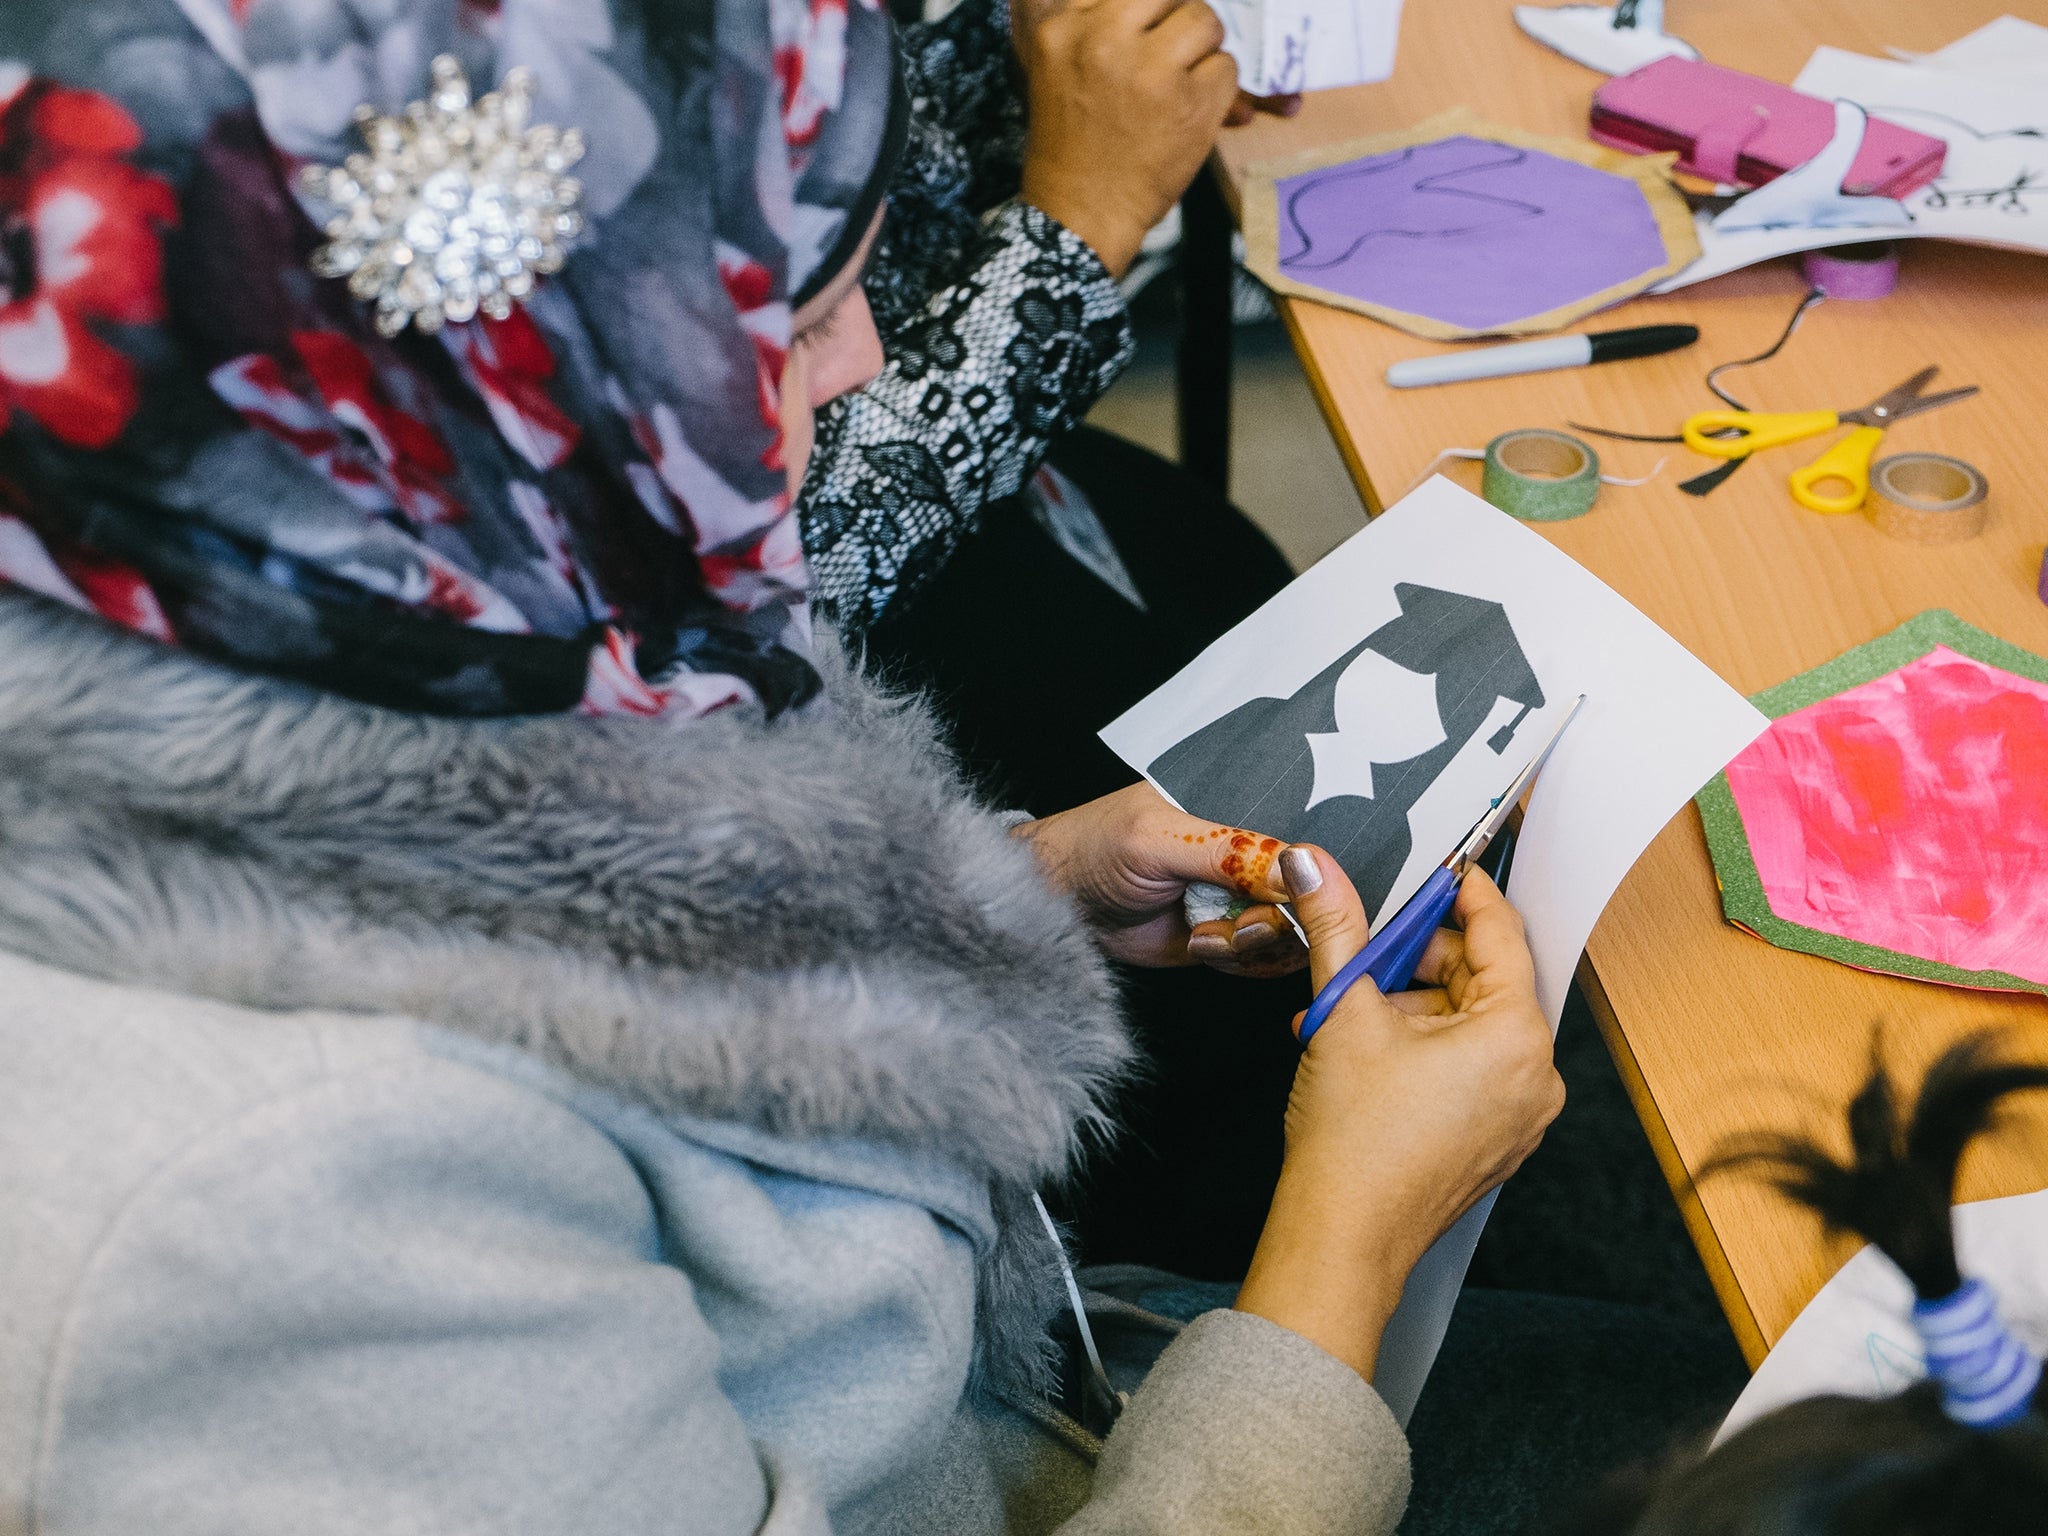 Art is helping the women to rebuild their confidence